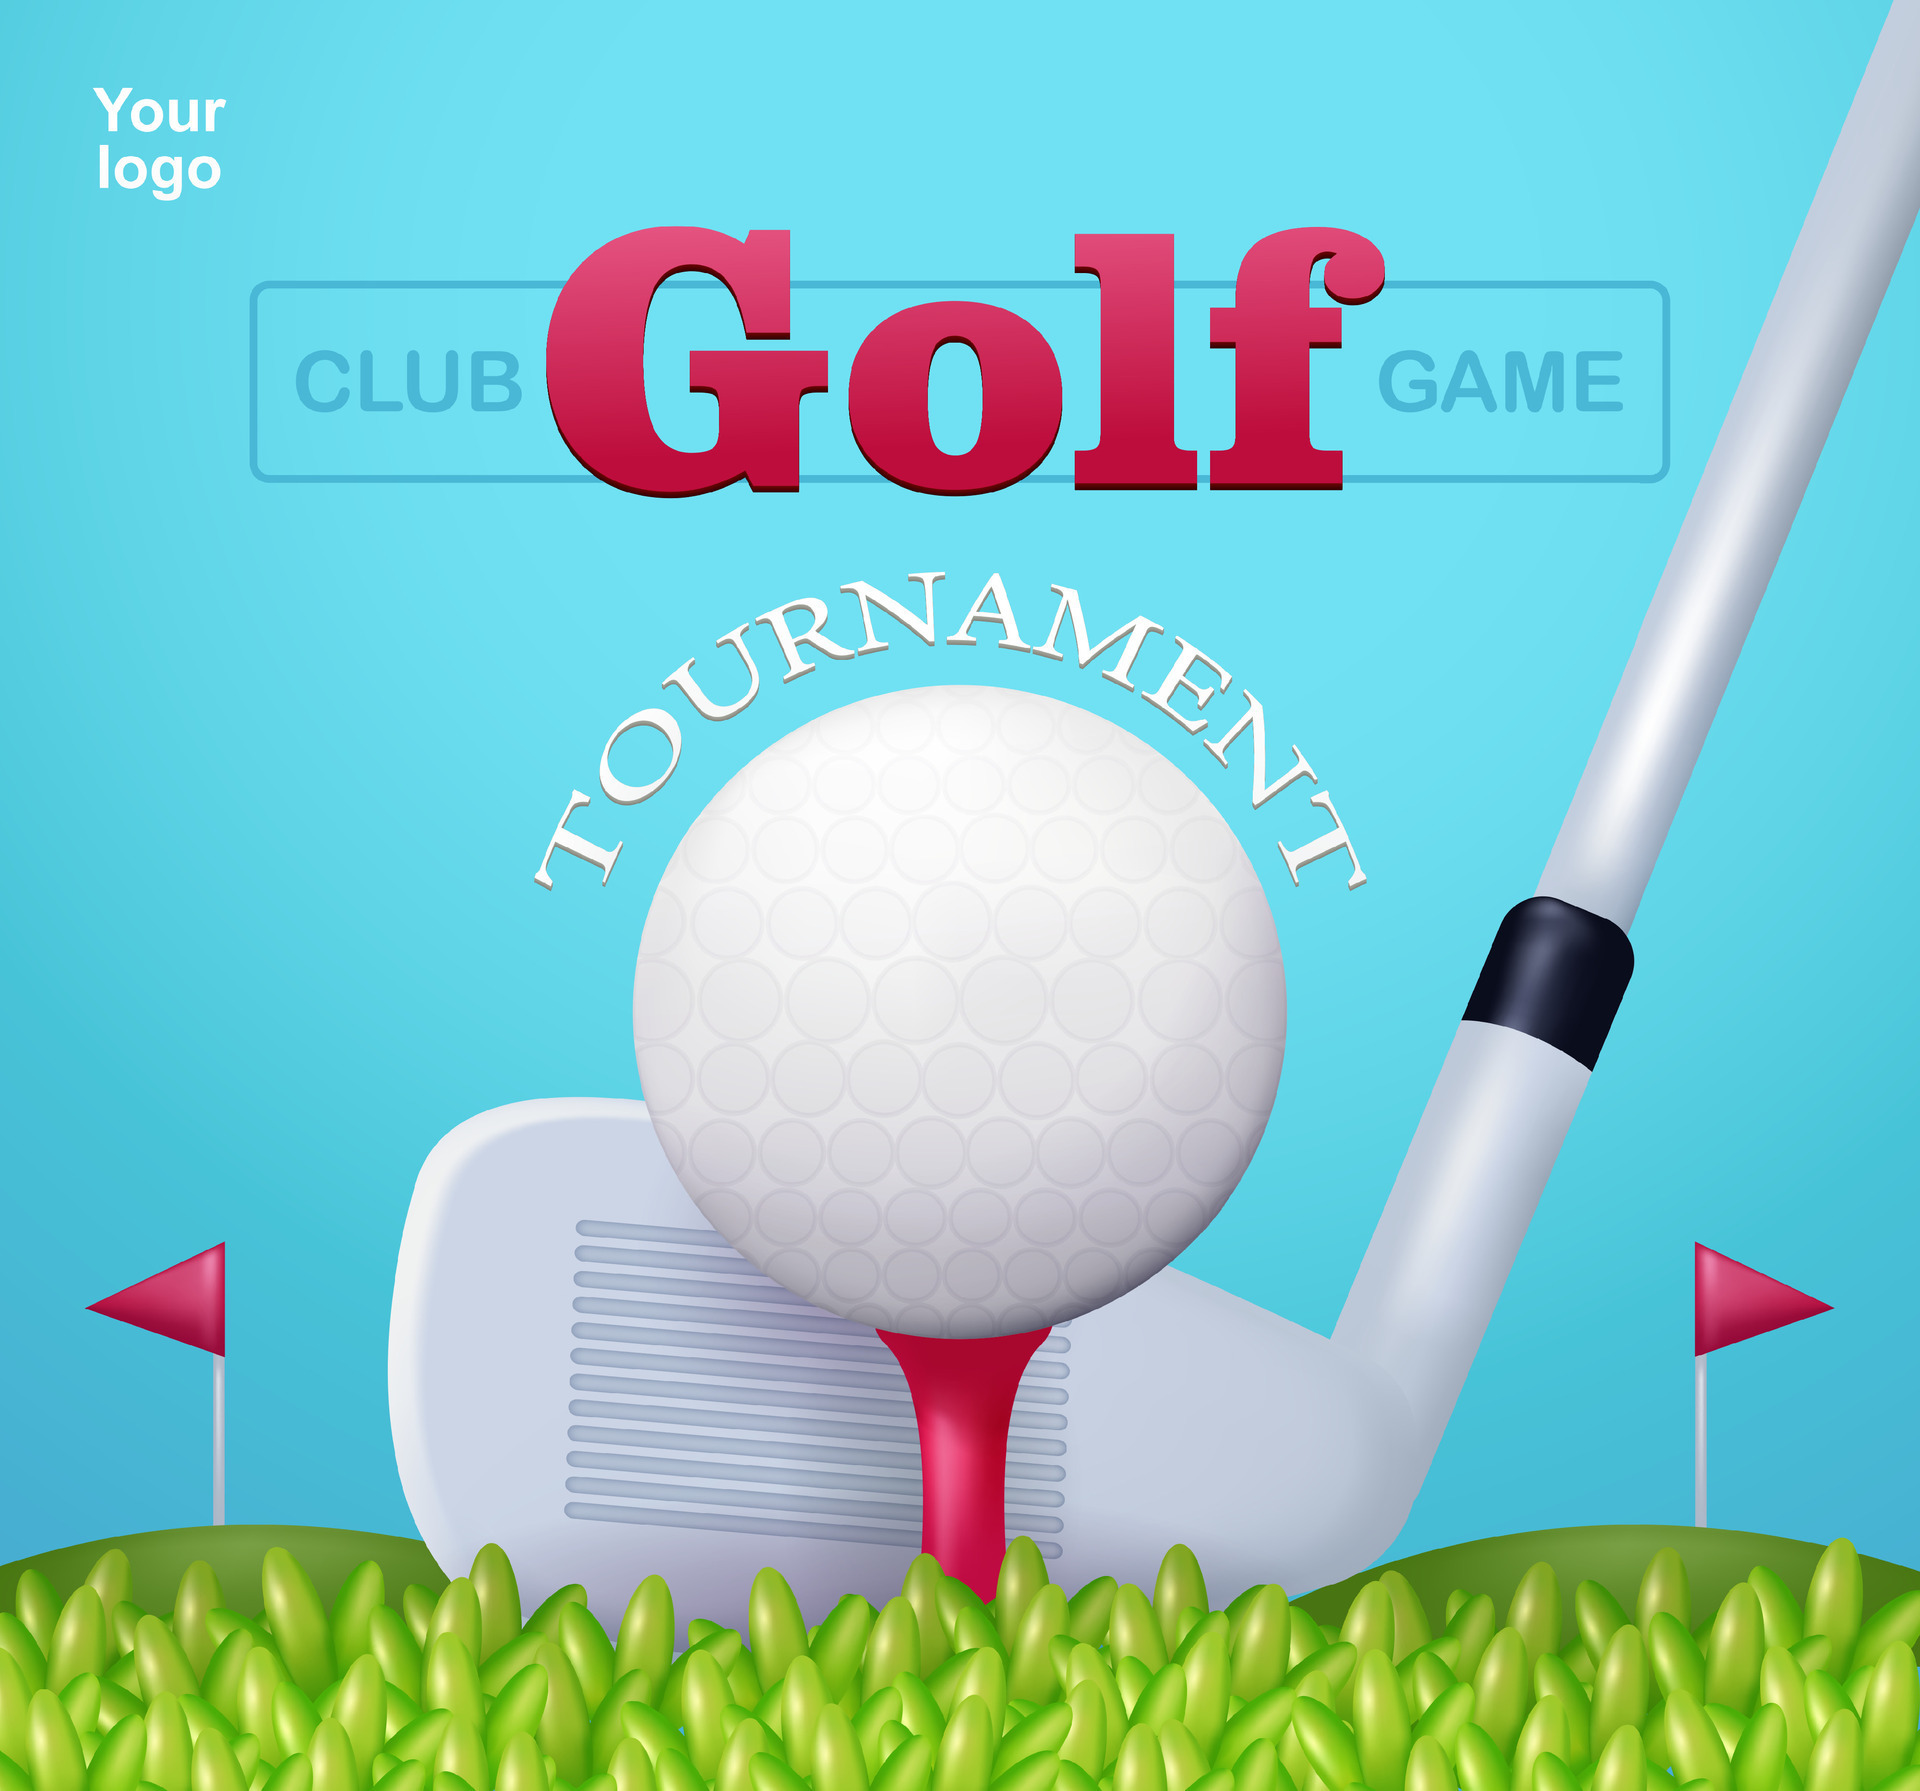 Golf clubs and balls for sporting events Vector Image